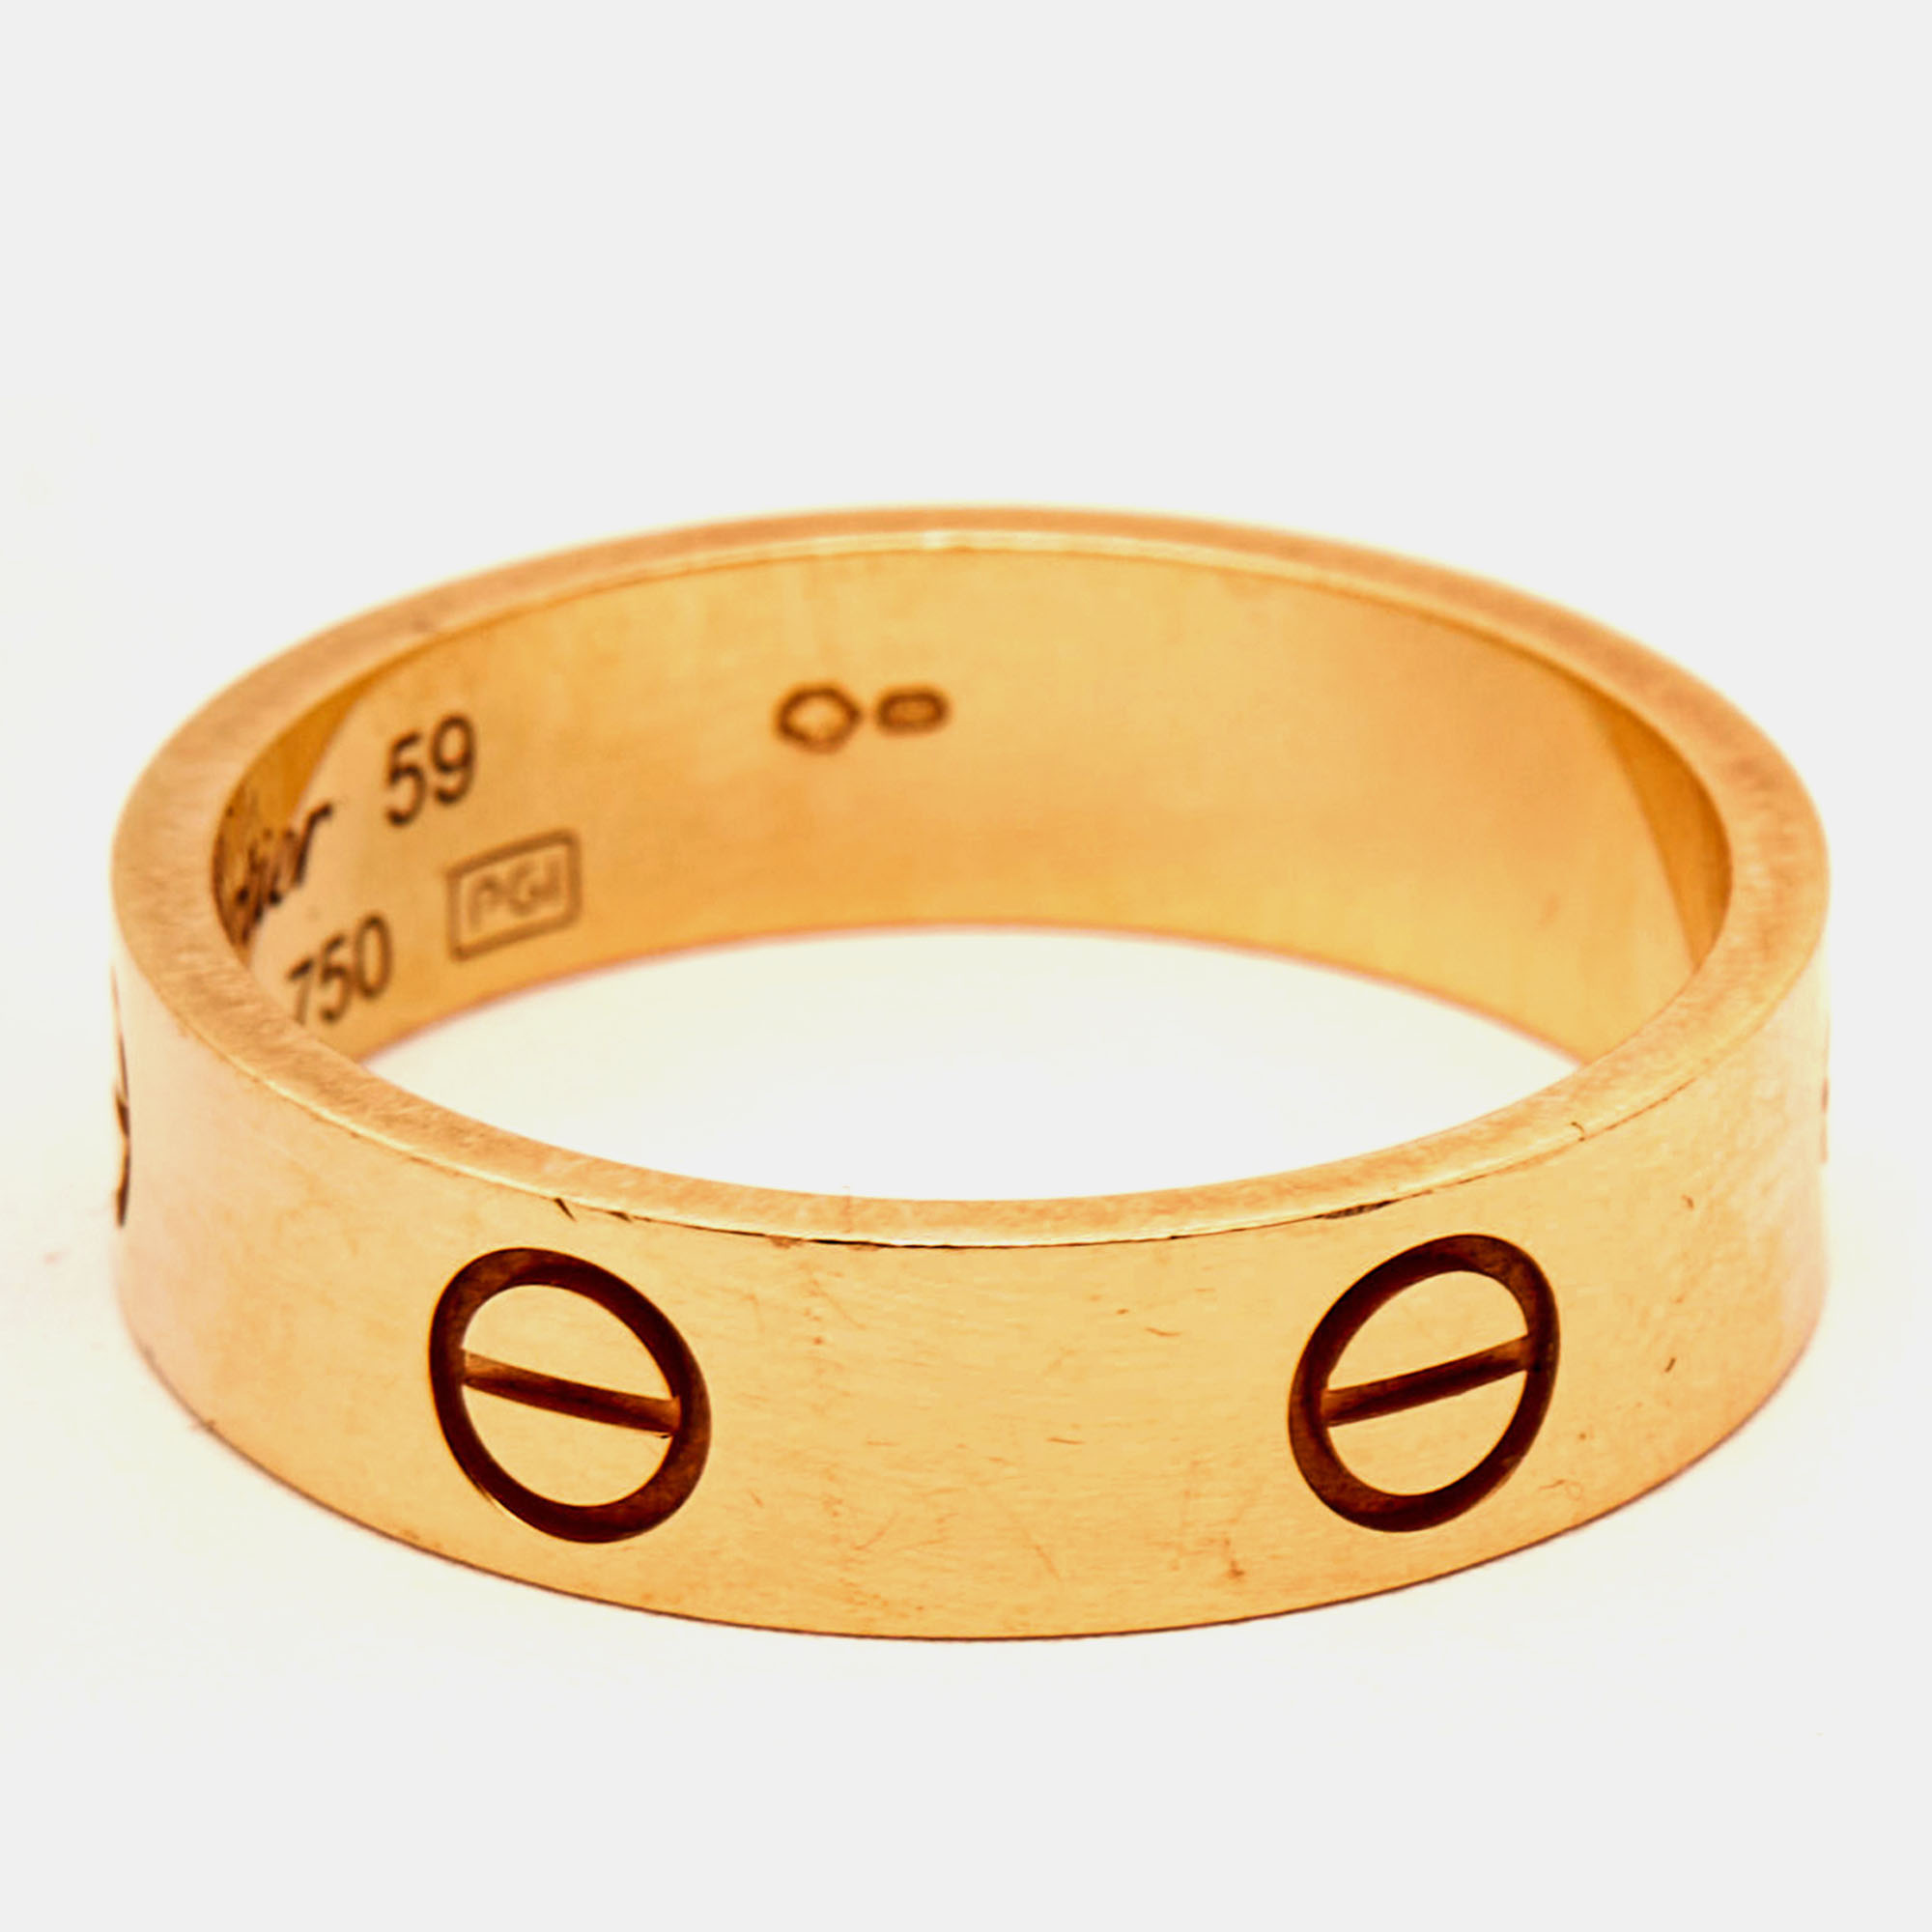 Cartier Love 18k Rose Gold Ring Size 59